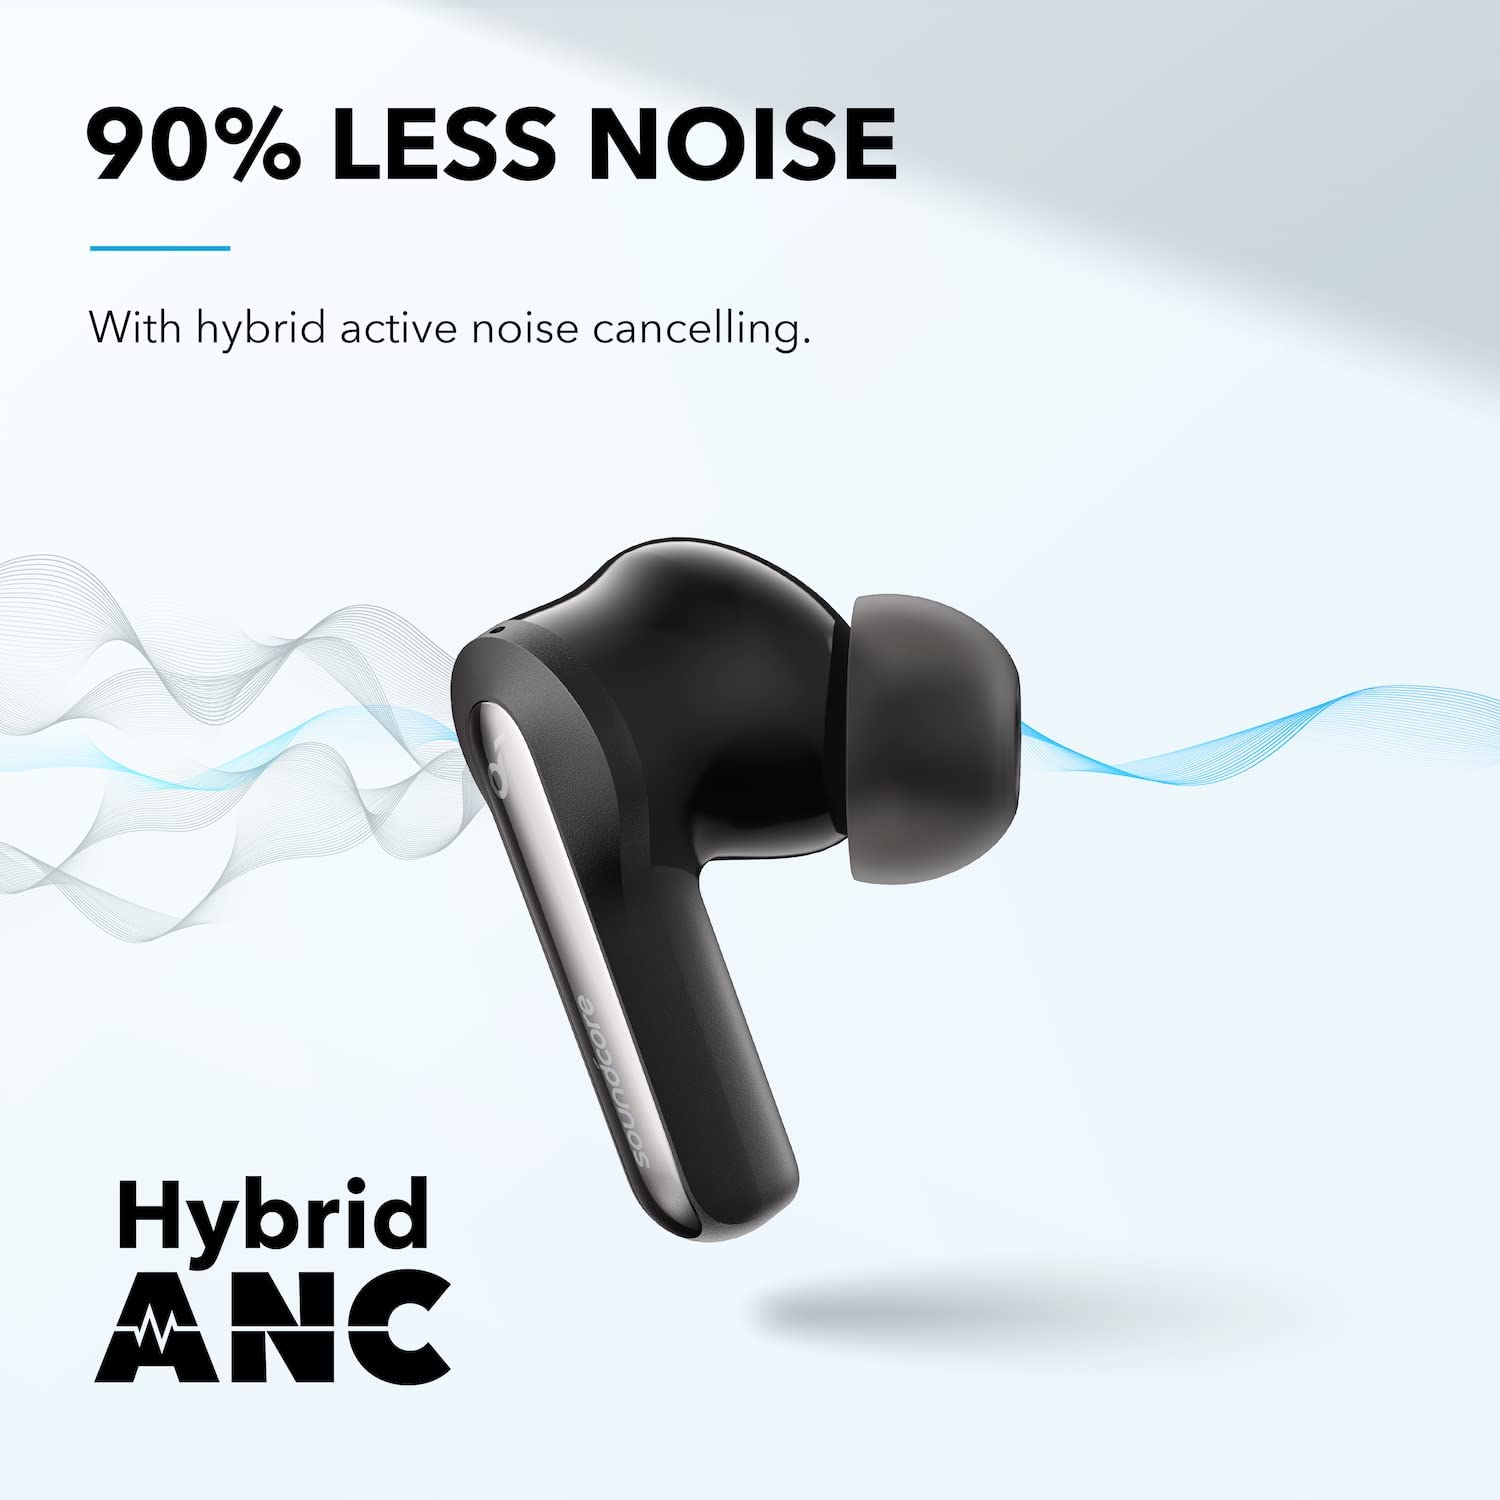 Soundcore Life P3i Hybrid Active Noise Cancelling Earbuds ,4 Mics, Custom EQ,6H Playtime,Black - image 2 of 7